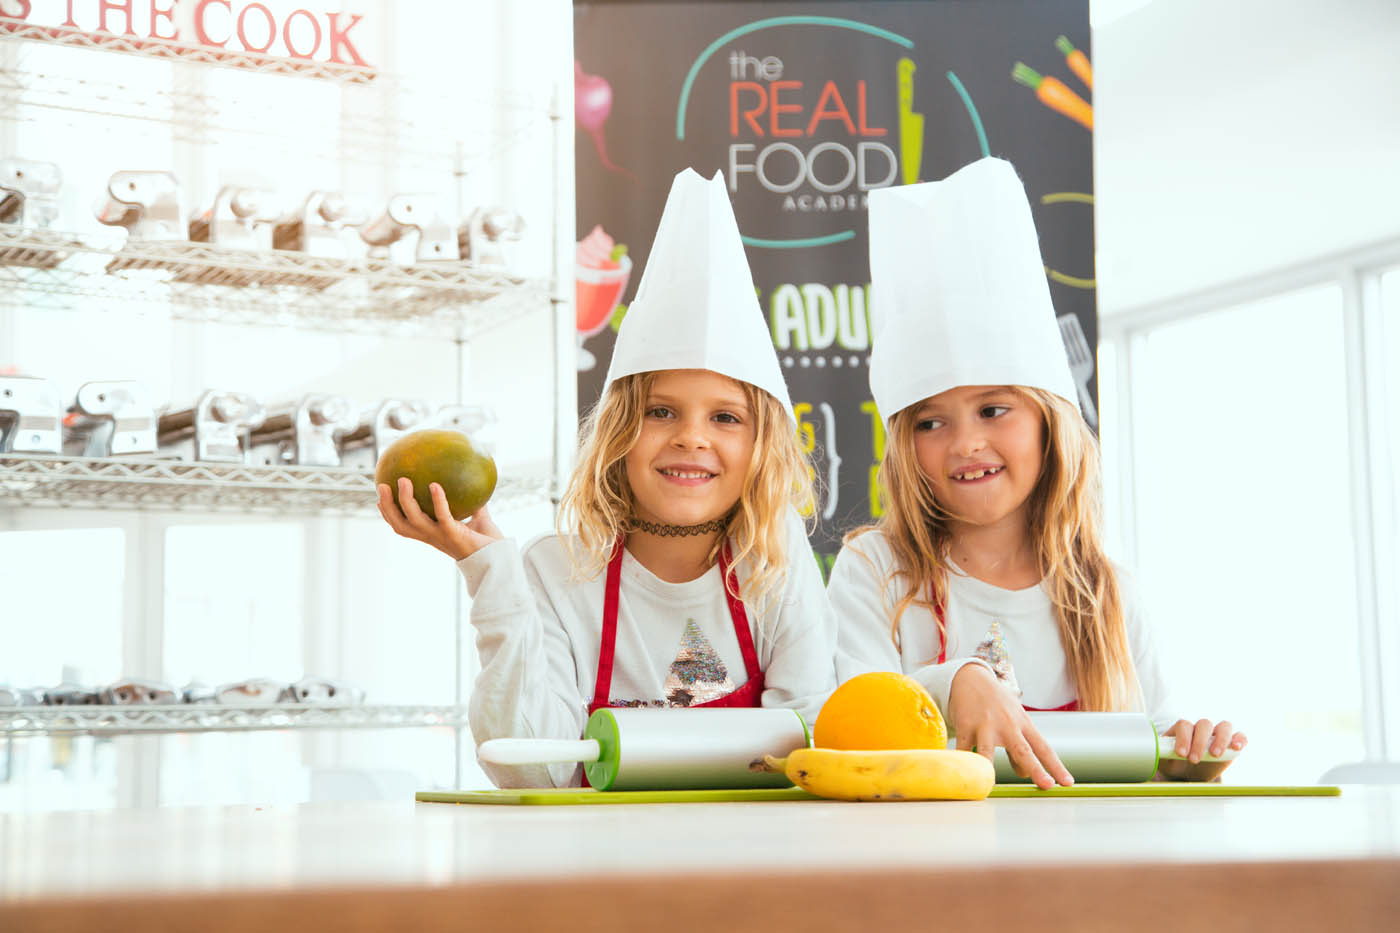 The Real Food Academy Miami - Best Miami Kids Birthday Party Place. Real Food Academy